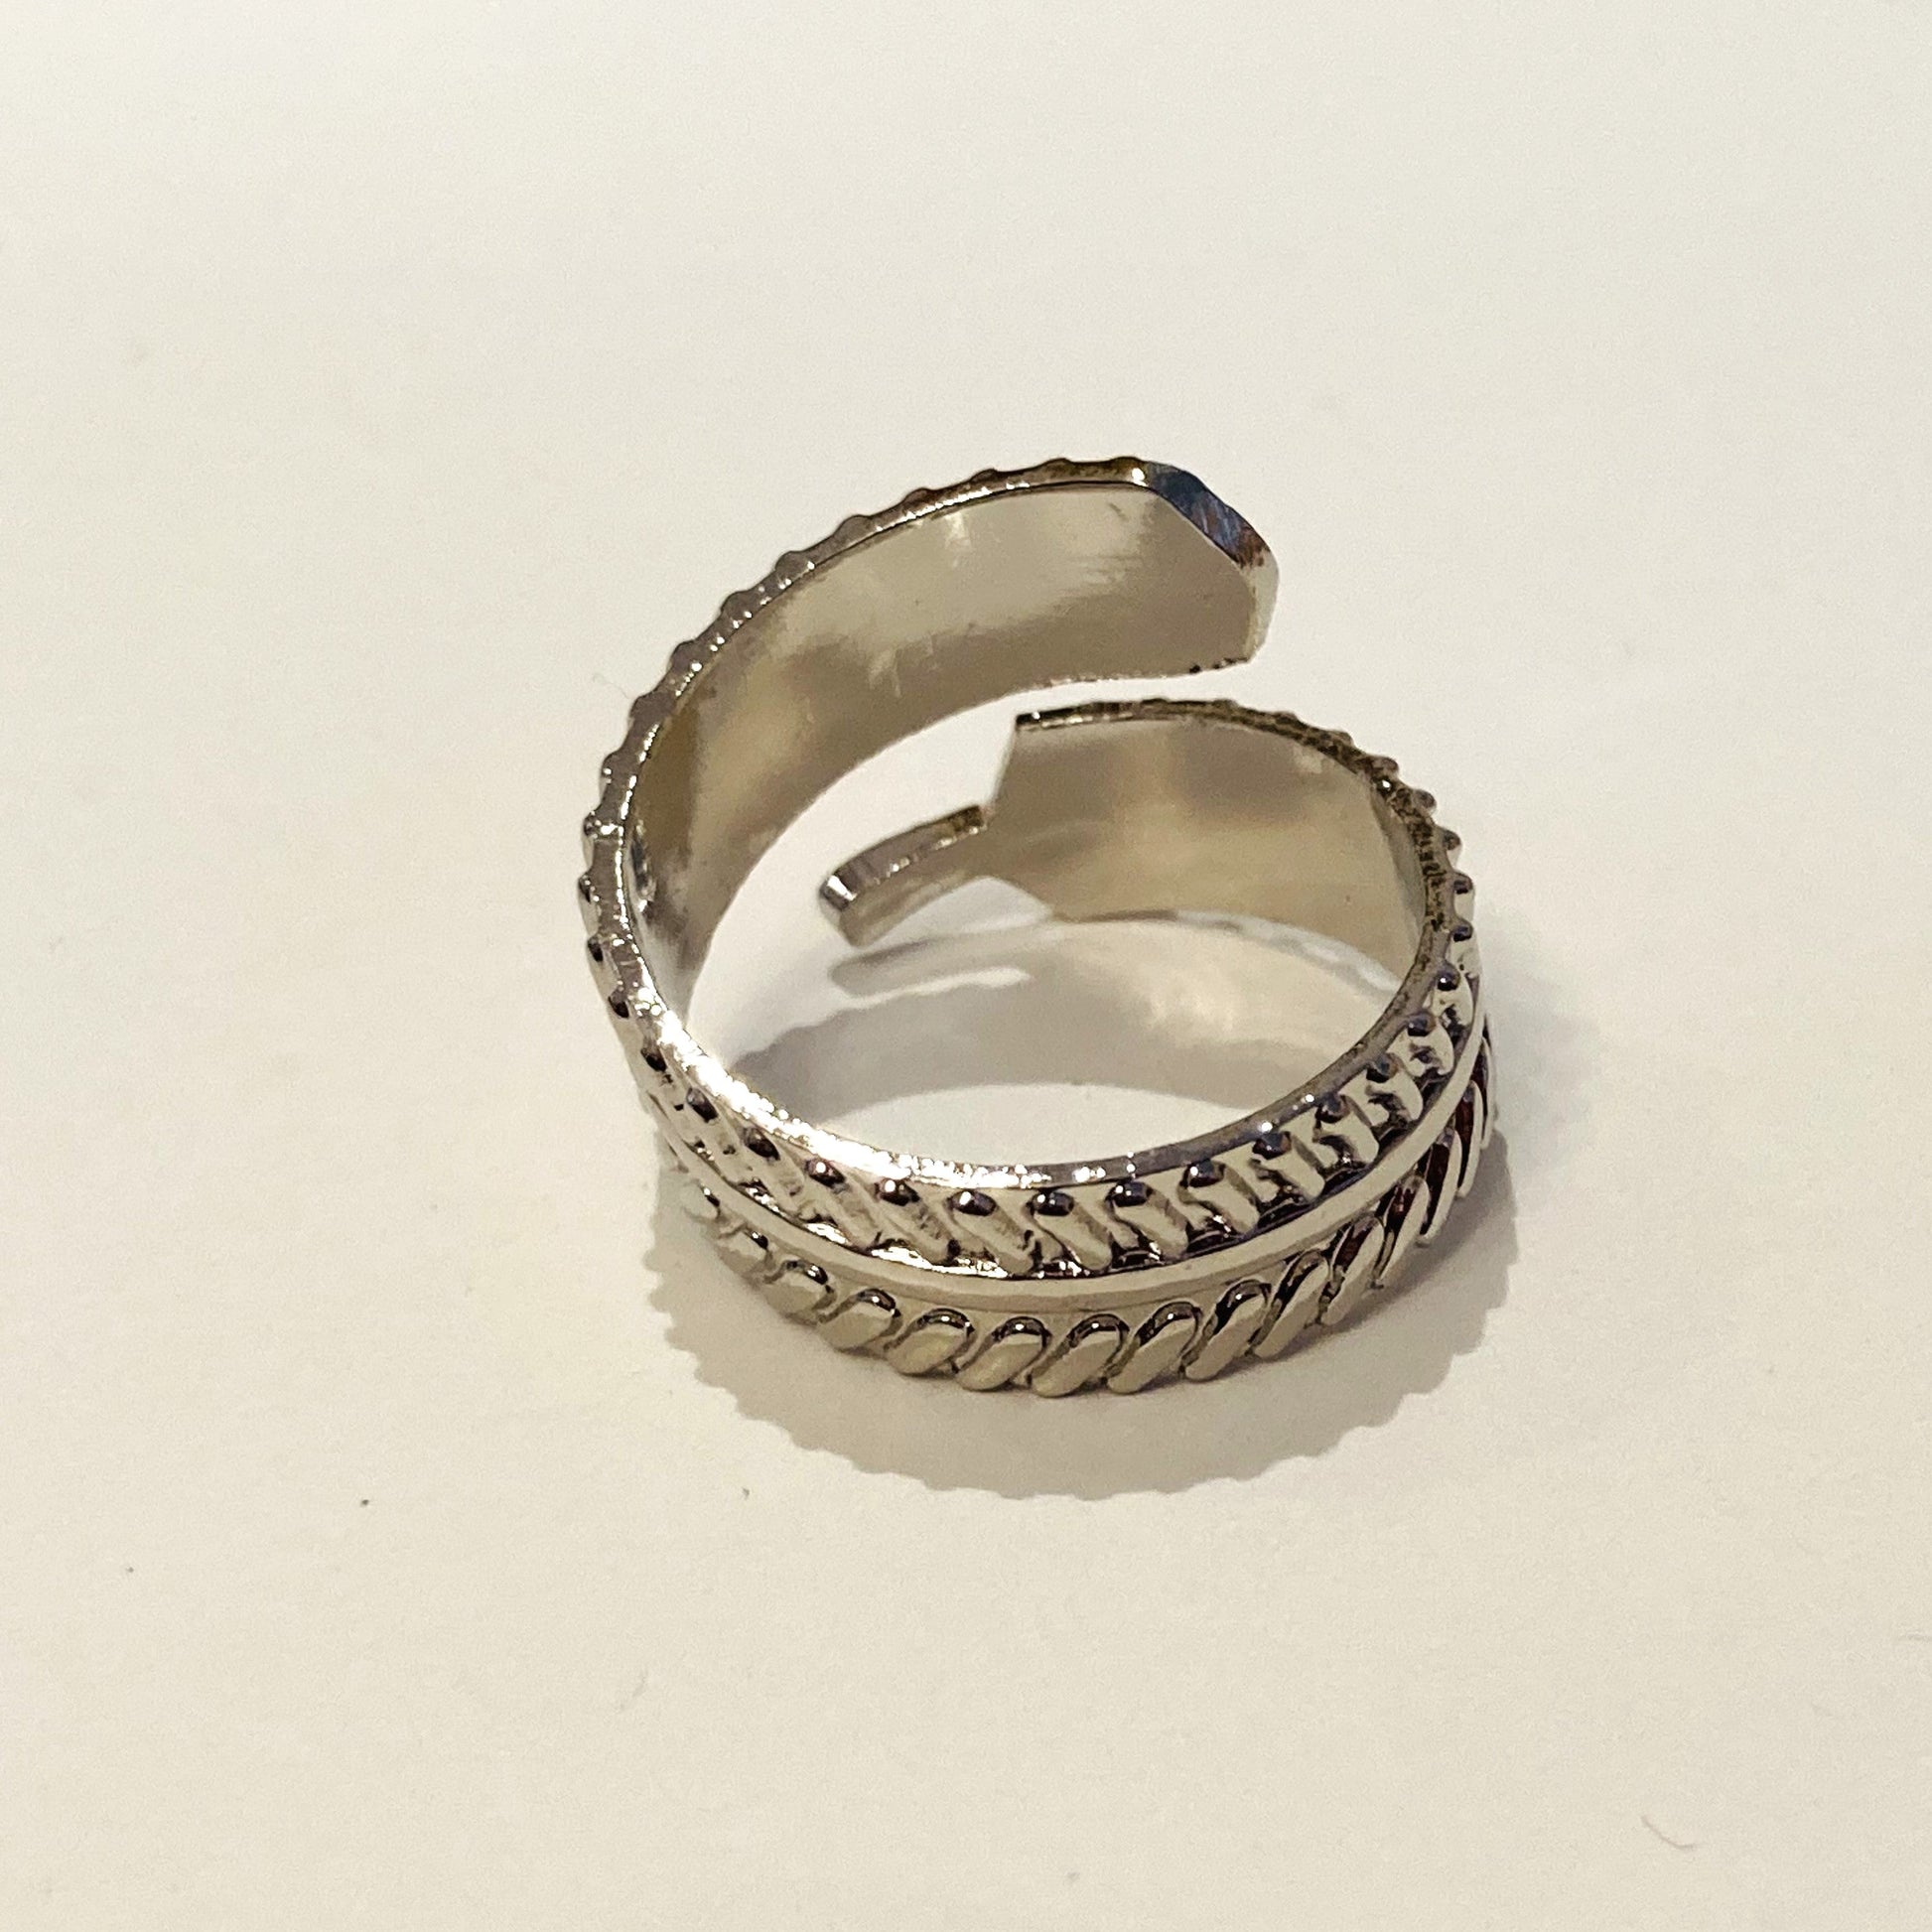 Handmade Brass Ring Plated with Chrome - Leaves